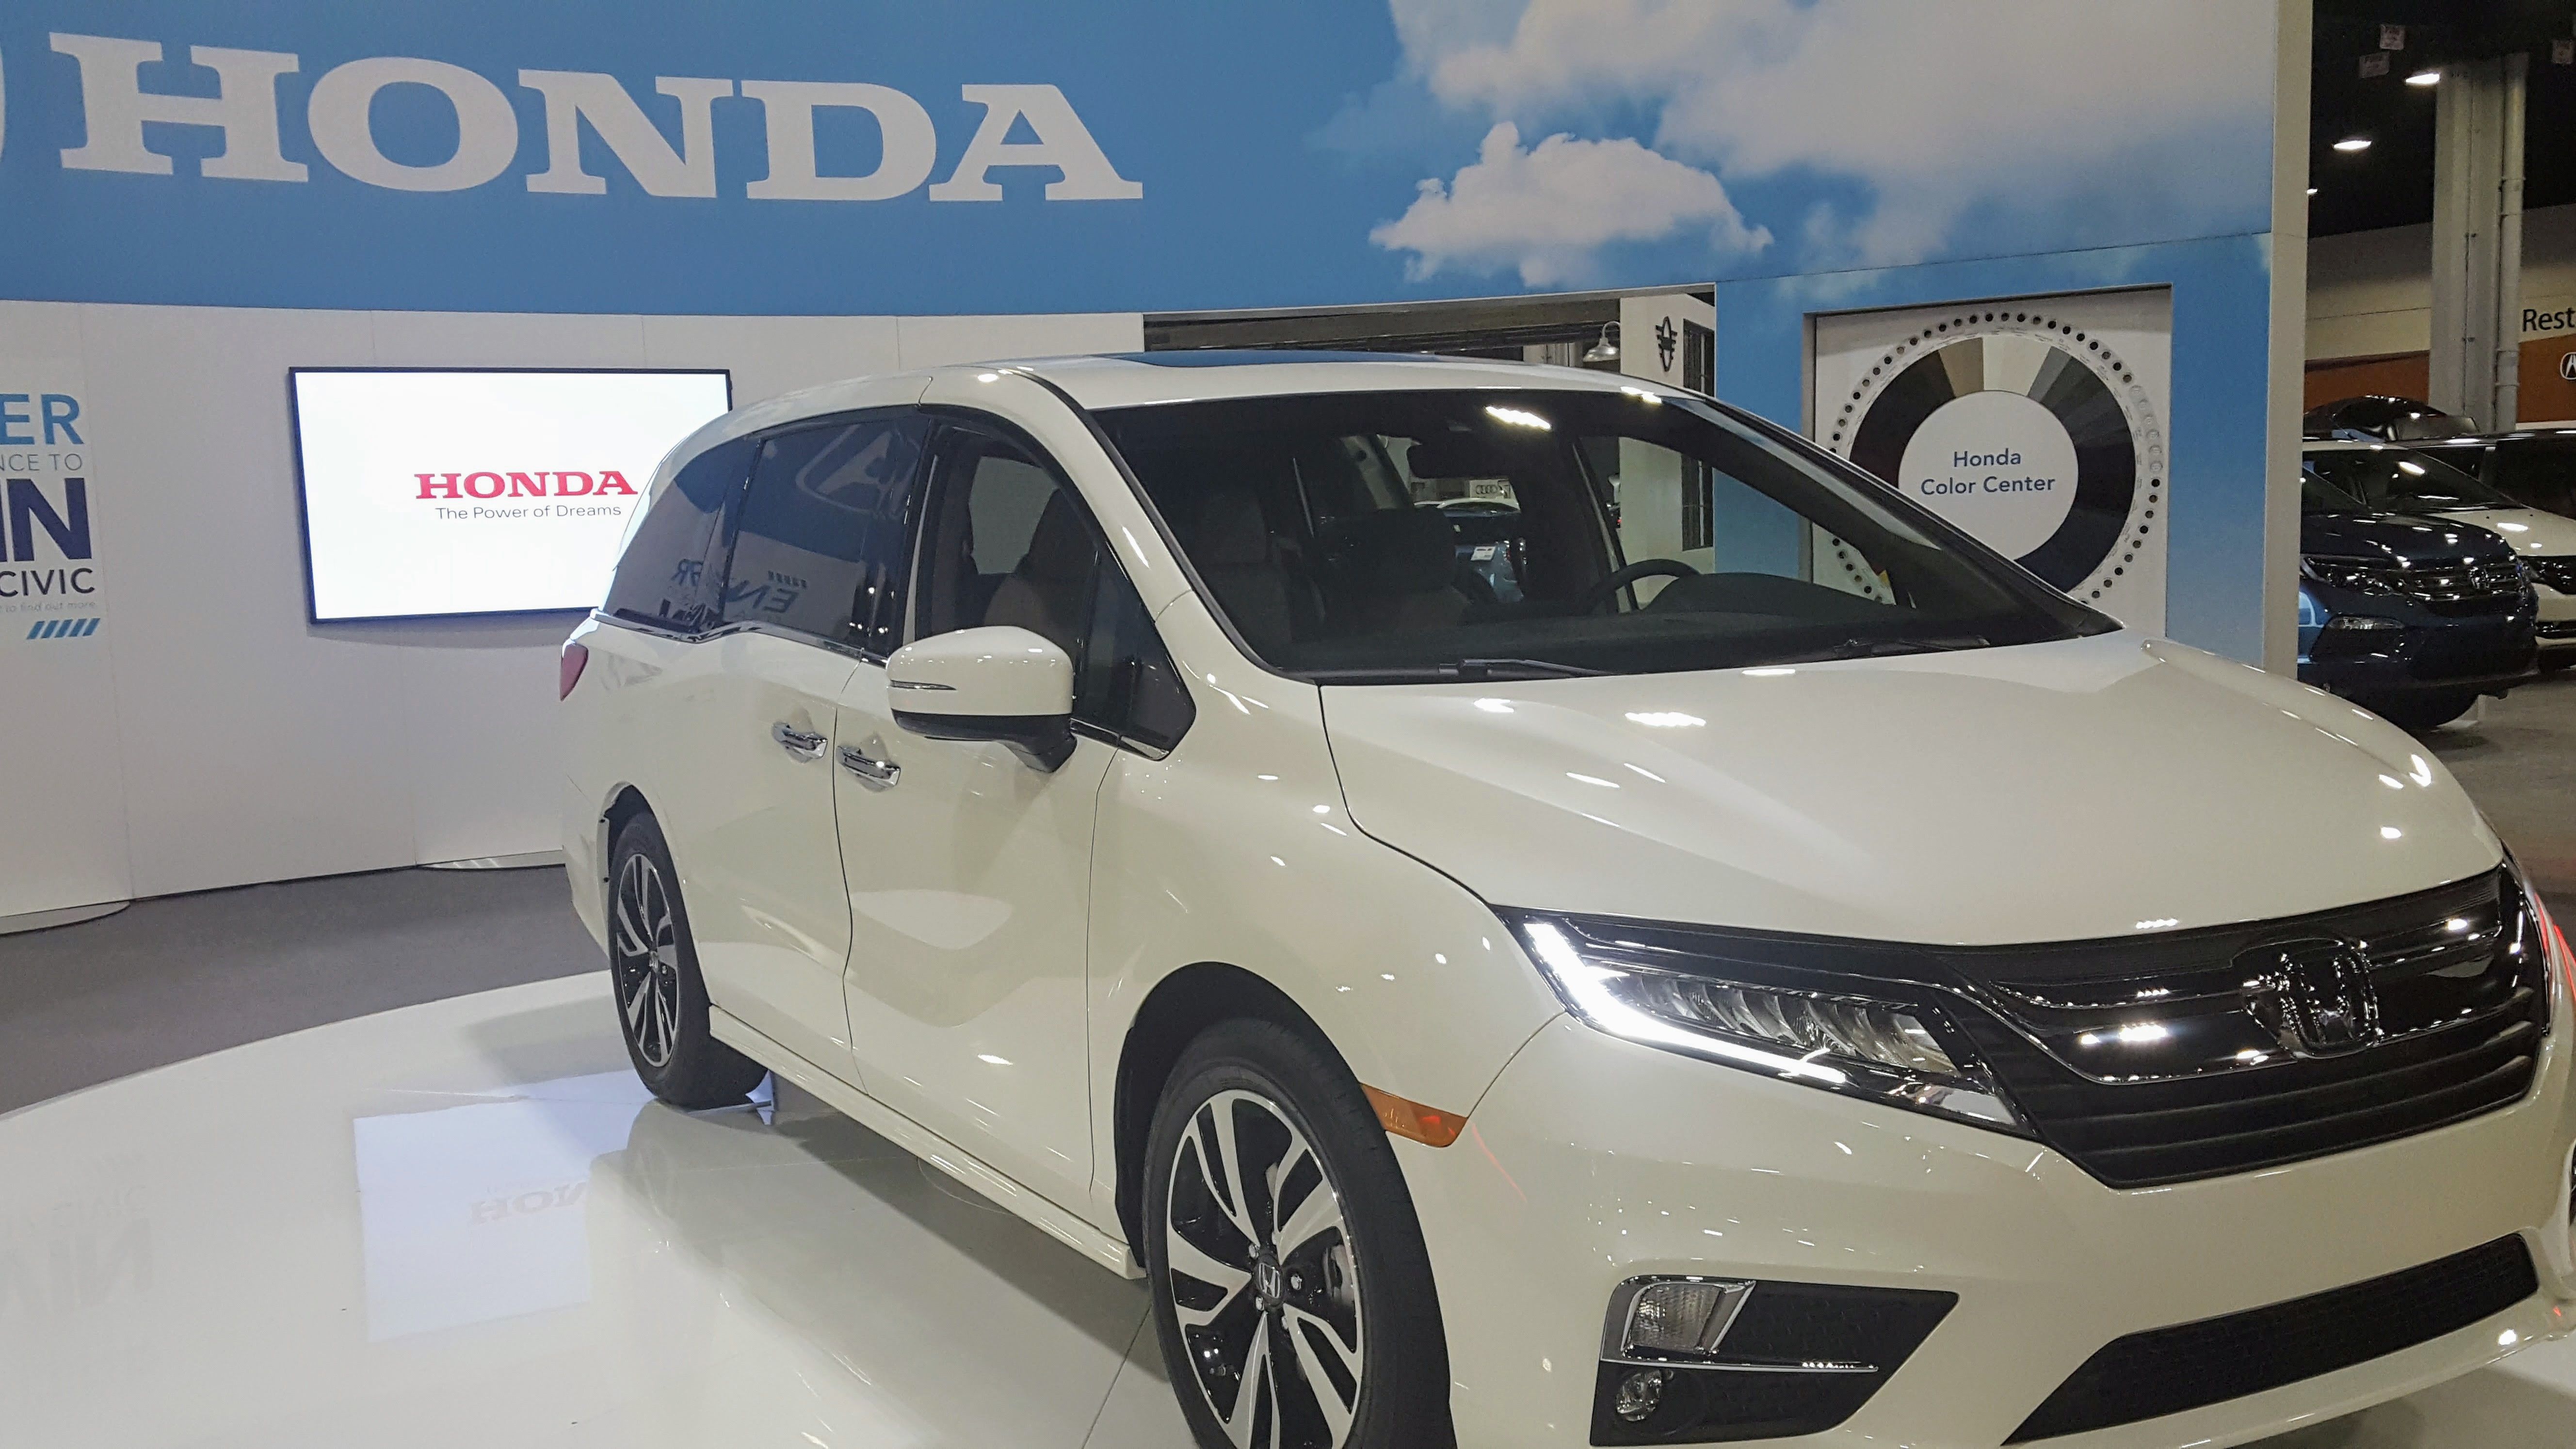 The Honda Odyssey Will Continue Be One Of The Best Minivans Of 2018 With Loads Of Useful Minivan Features